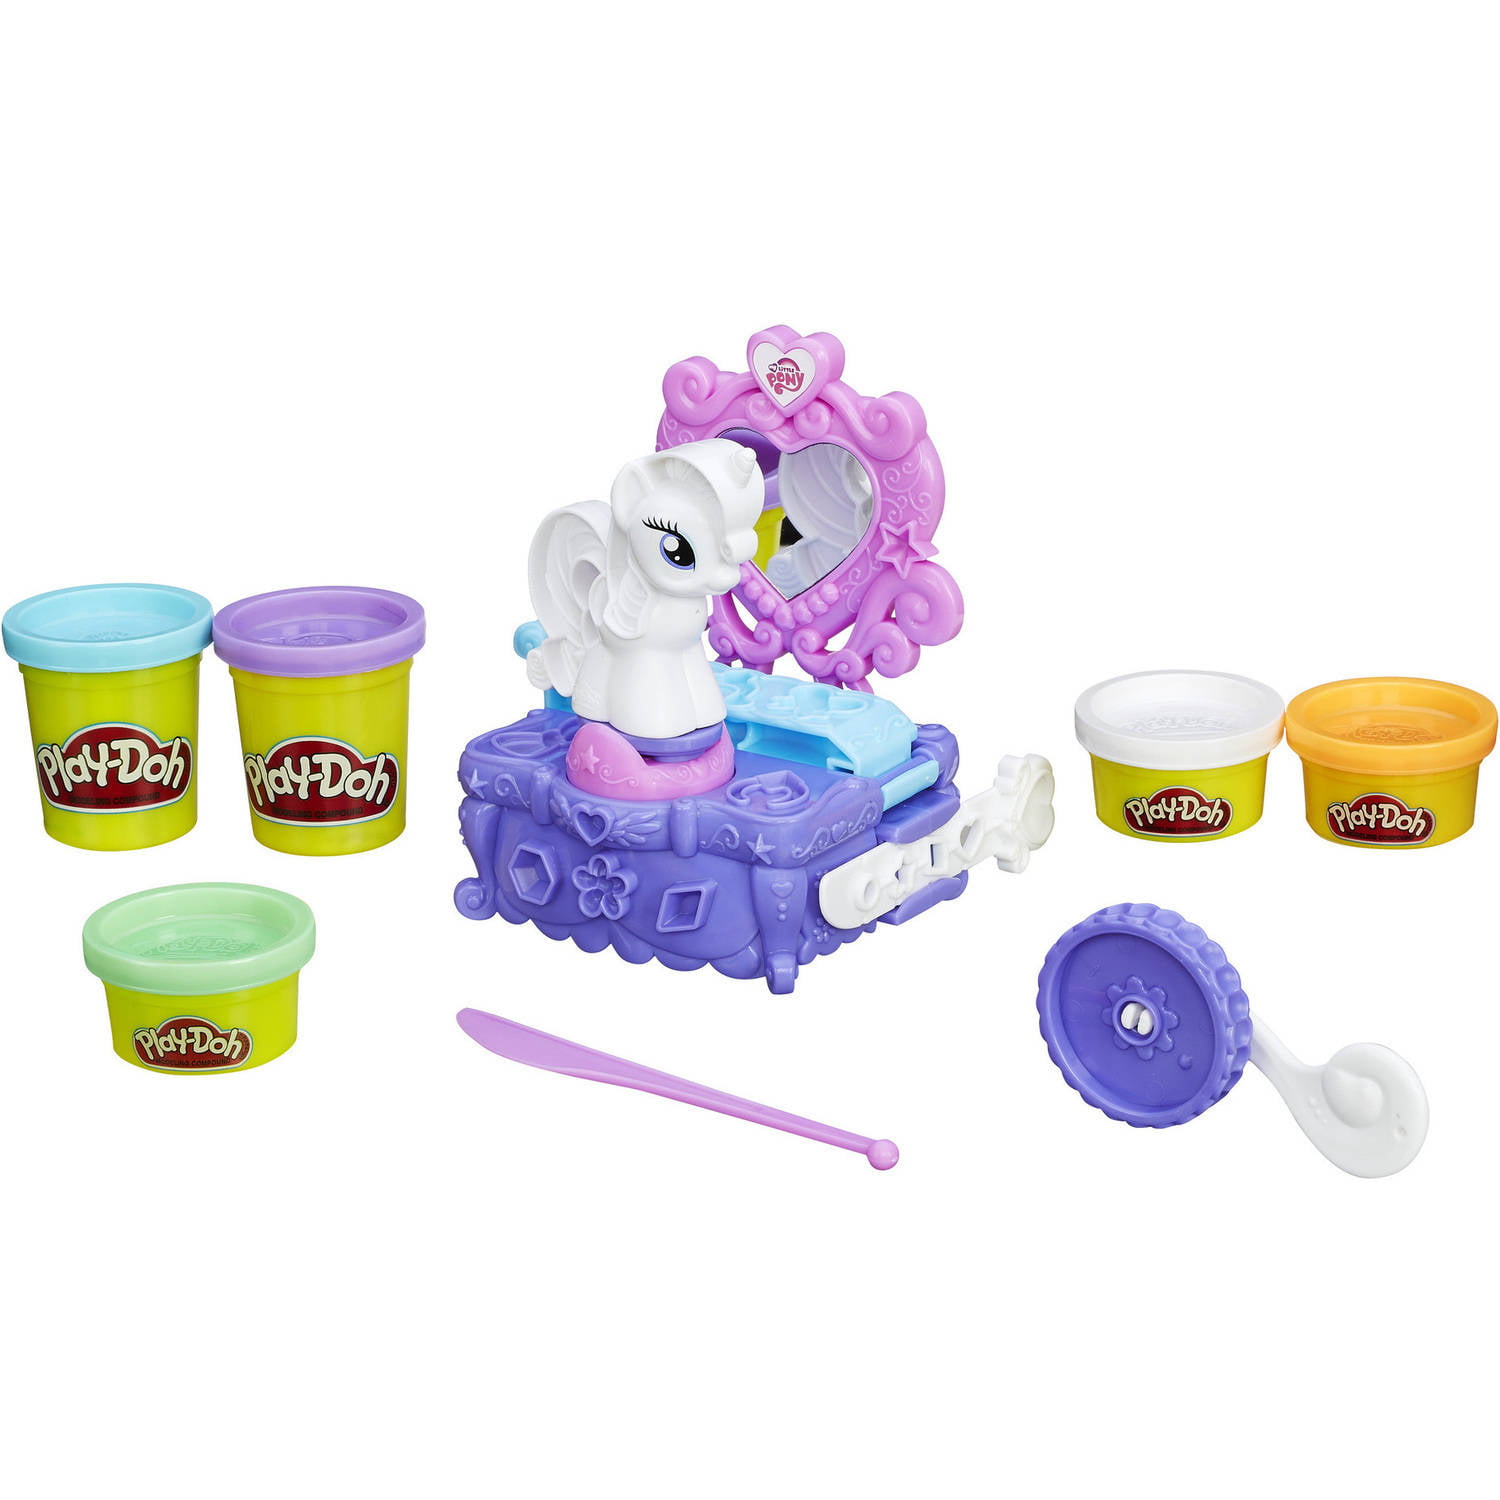 5 doh colors Play doh My Little Pony Rarity Style & Spin Set style and stamp